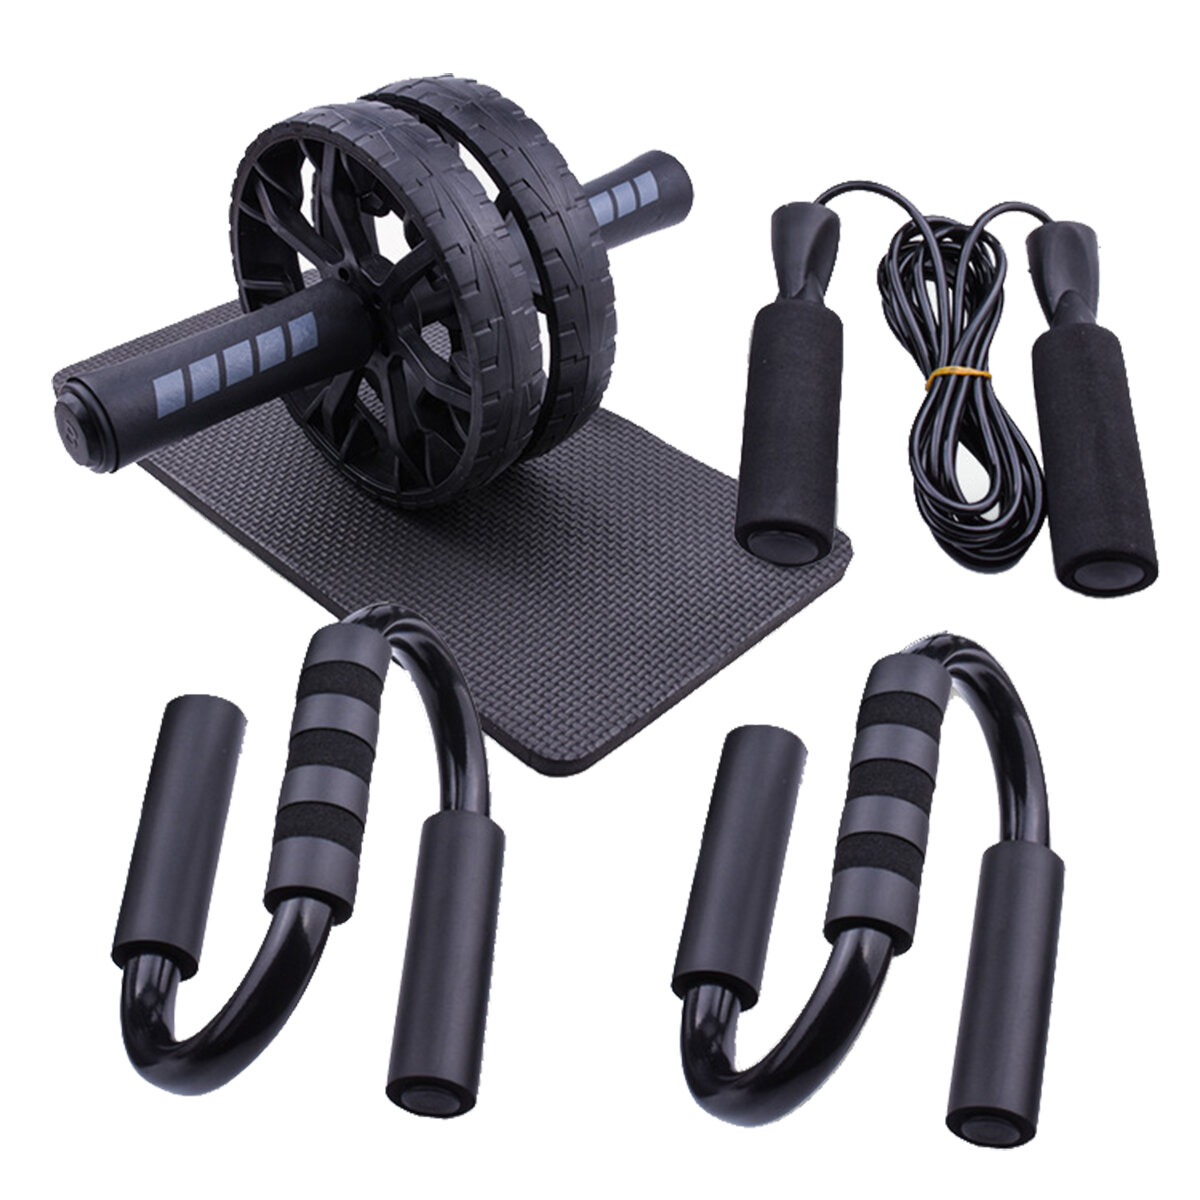 5PCS/SET AB Wheel Roller Kit Abdominal Muscle Fitness Push-UP Bar Jump Rope Equipment Home Exercise